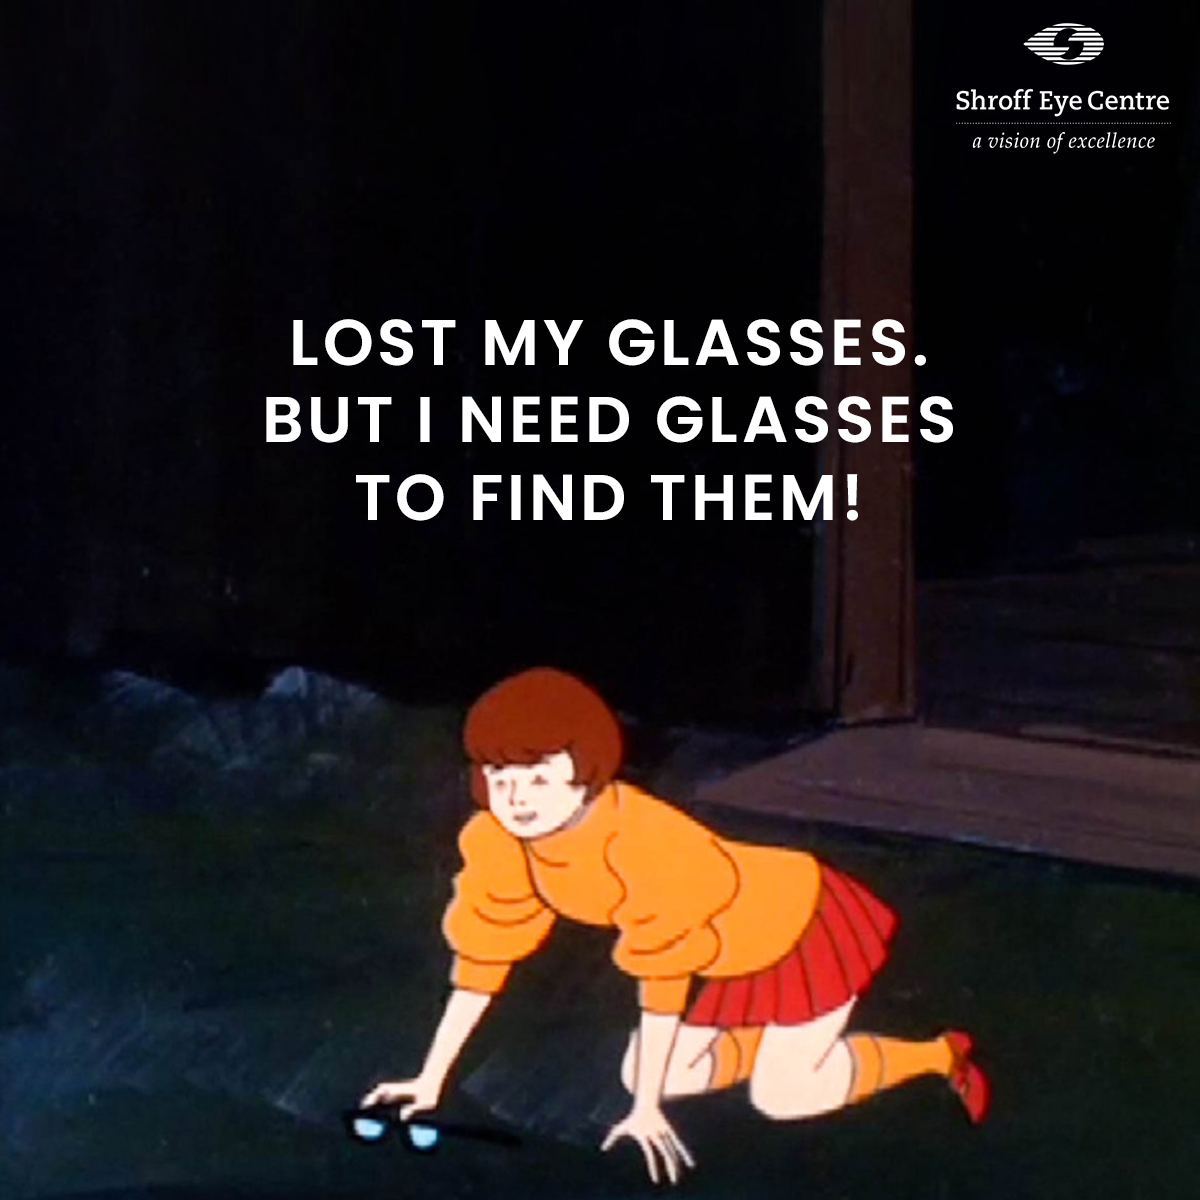 Can you relate with this problem if you wear glasses?
Do tell us in the comments if this happens with you as well.
.
.
.
.
.
.
.
.
.
.
#memeoftheday #shroffeyecentre #besteyecare #eyespecialist #EyeCare #VisionHealth #EyeMistakes #HealthyEyes #EyeHealthTips #kailashcolony